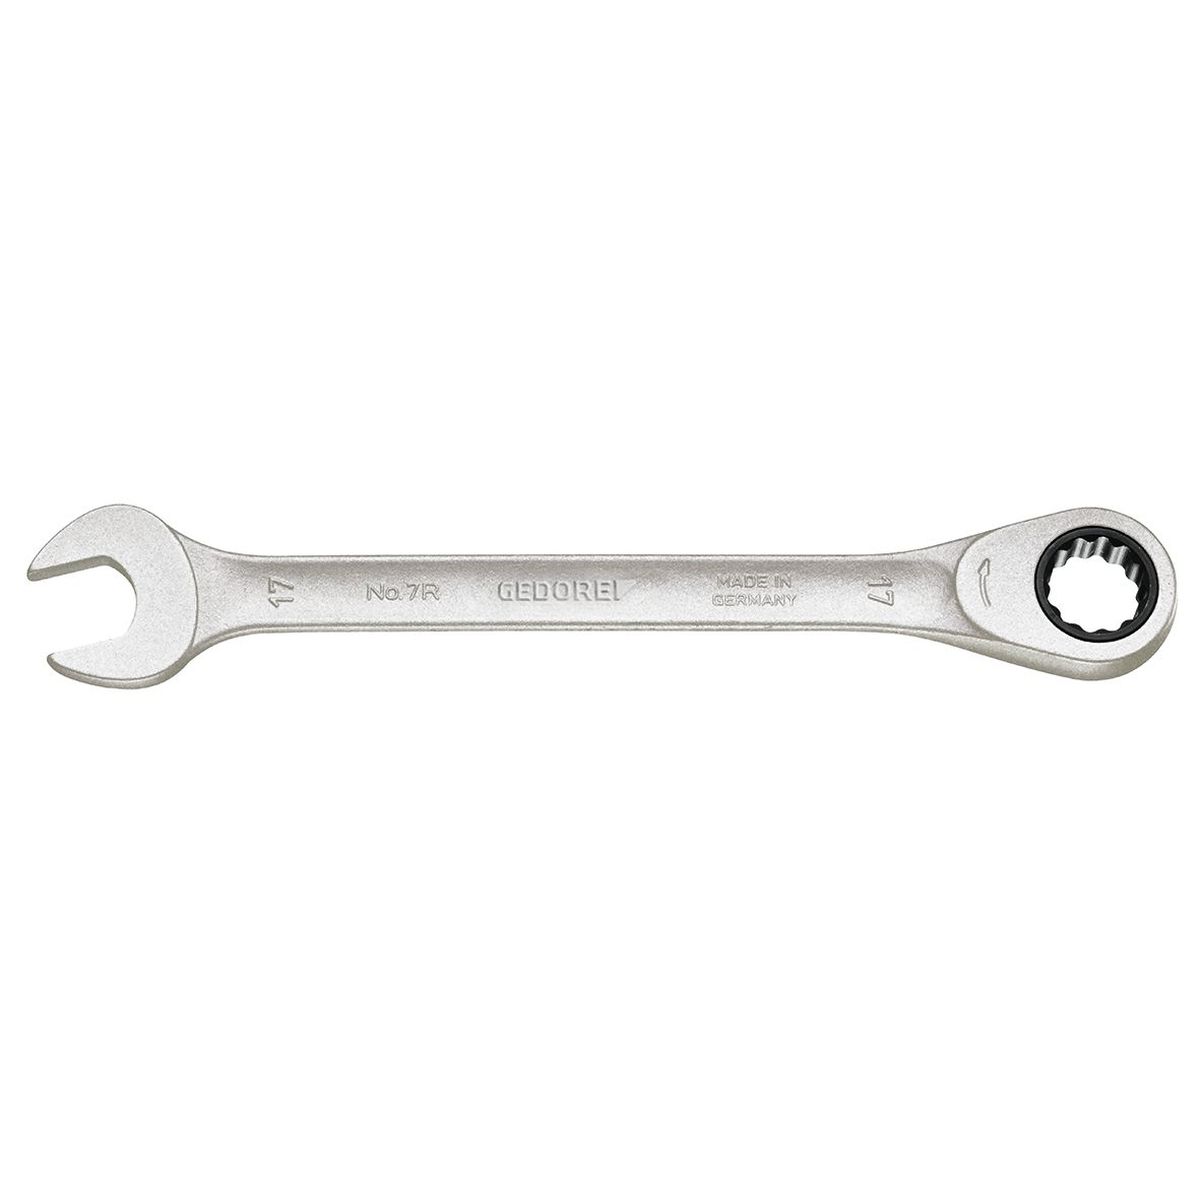 Combination ratchet spanner 11 mm 7 R 11 Gedore